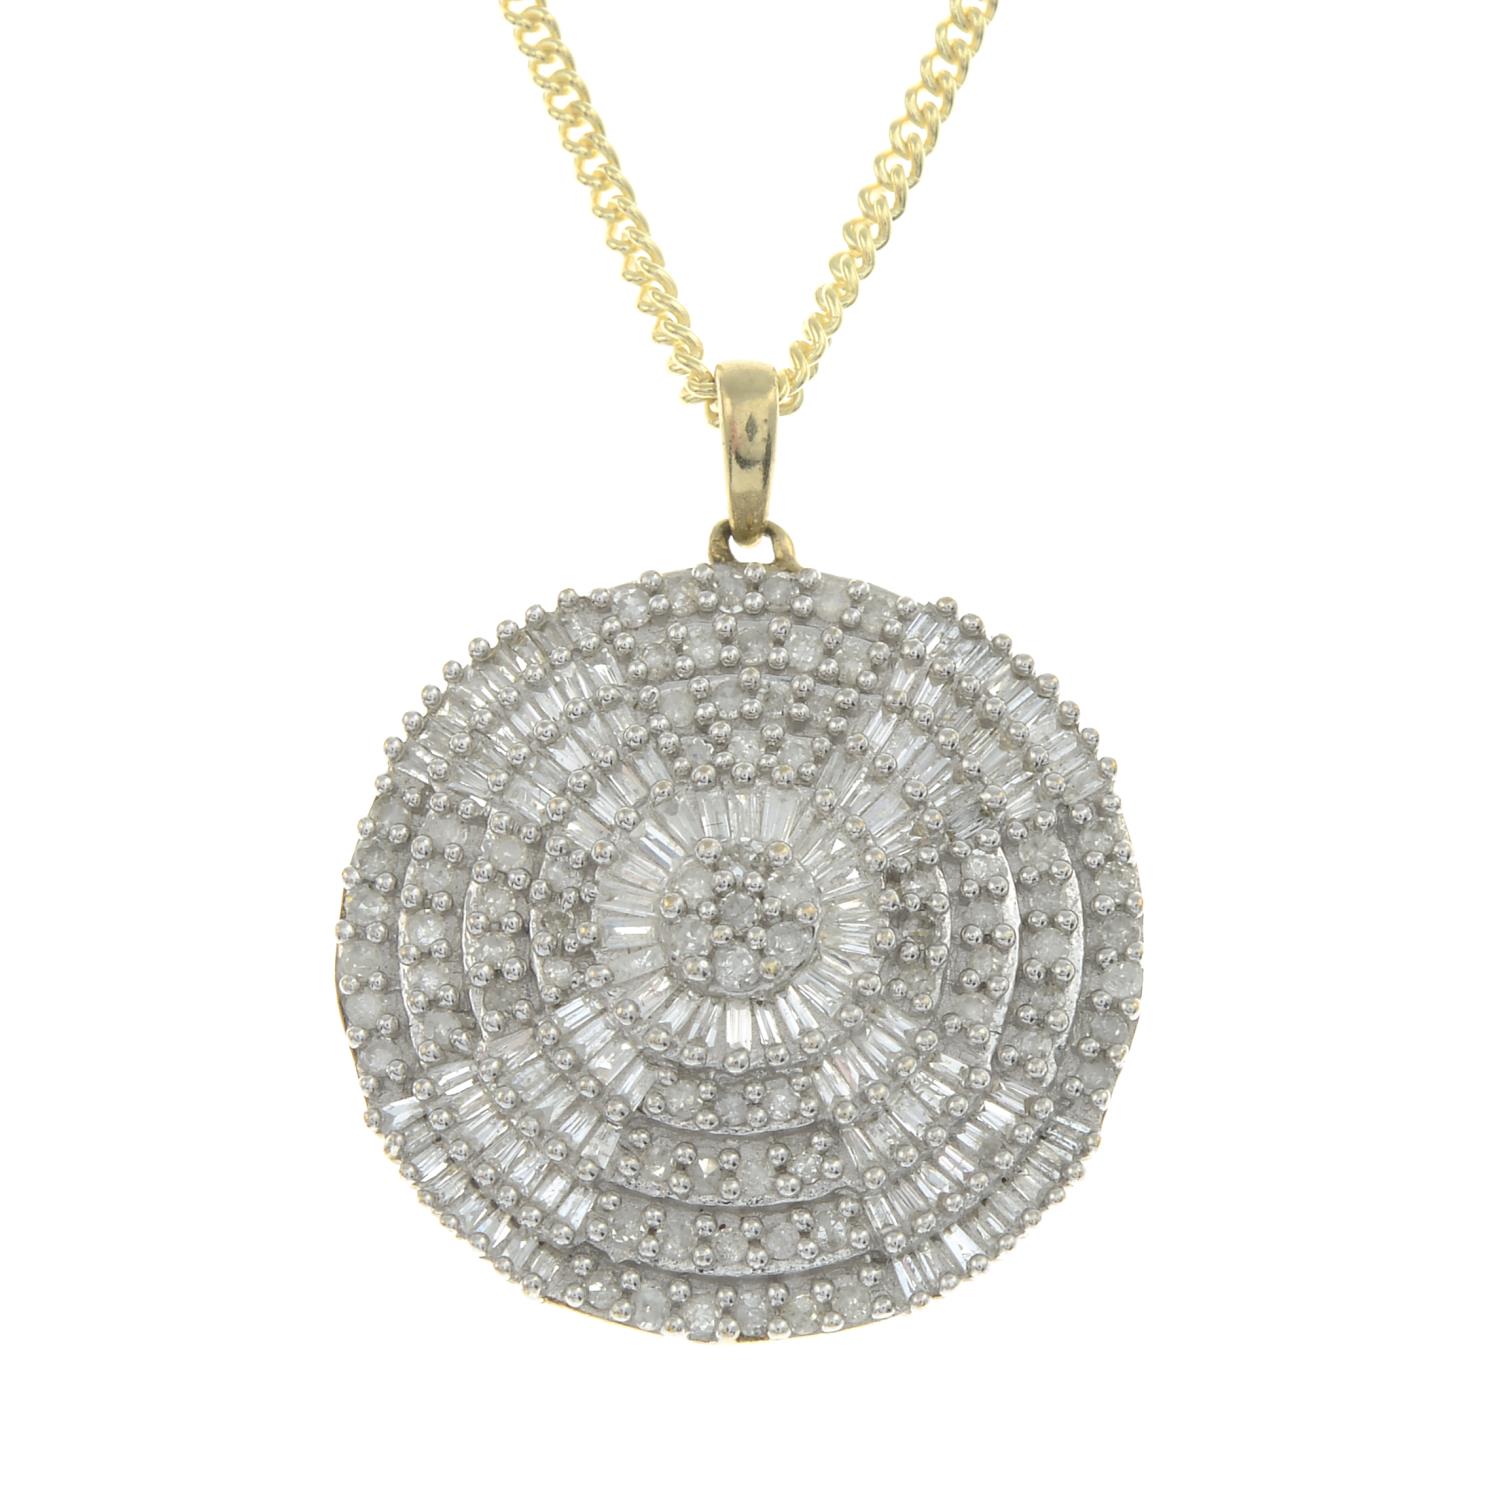 A 9ct gold diamond pendant, with 9ct gold chain.Estiamted total diamond weight 1.50cts.